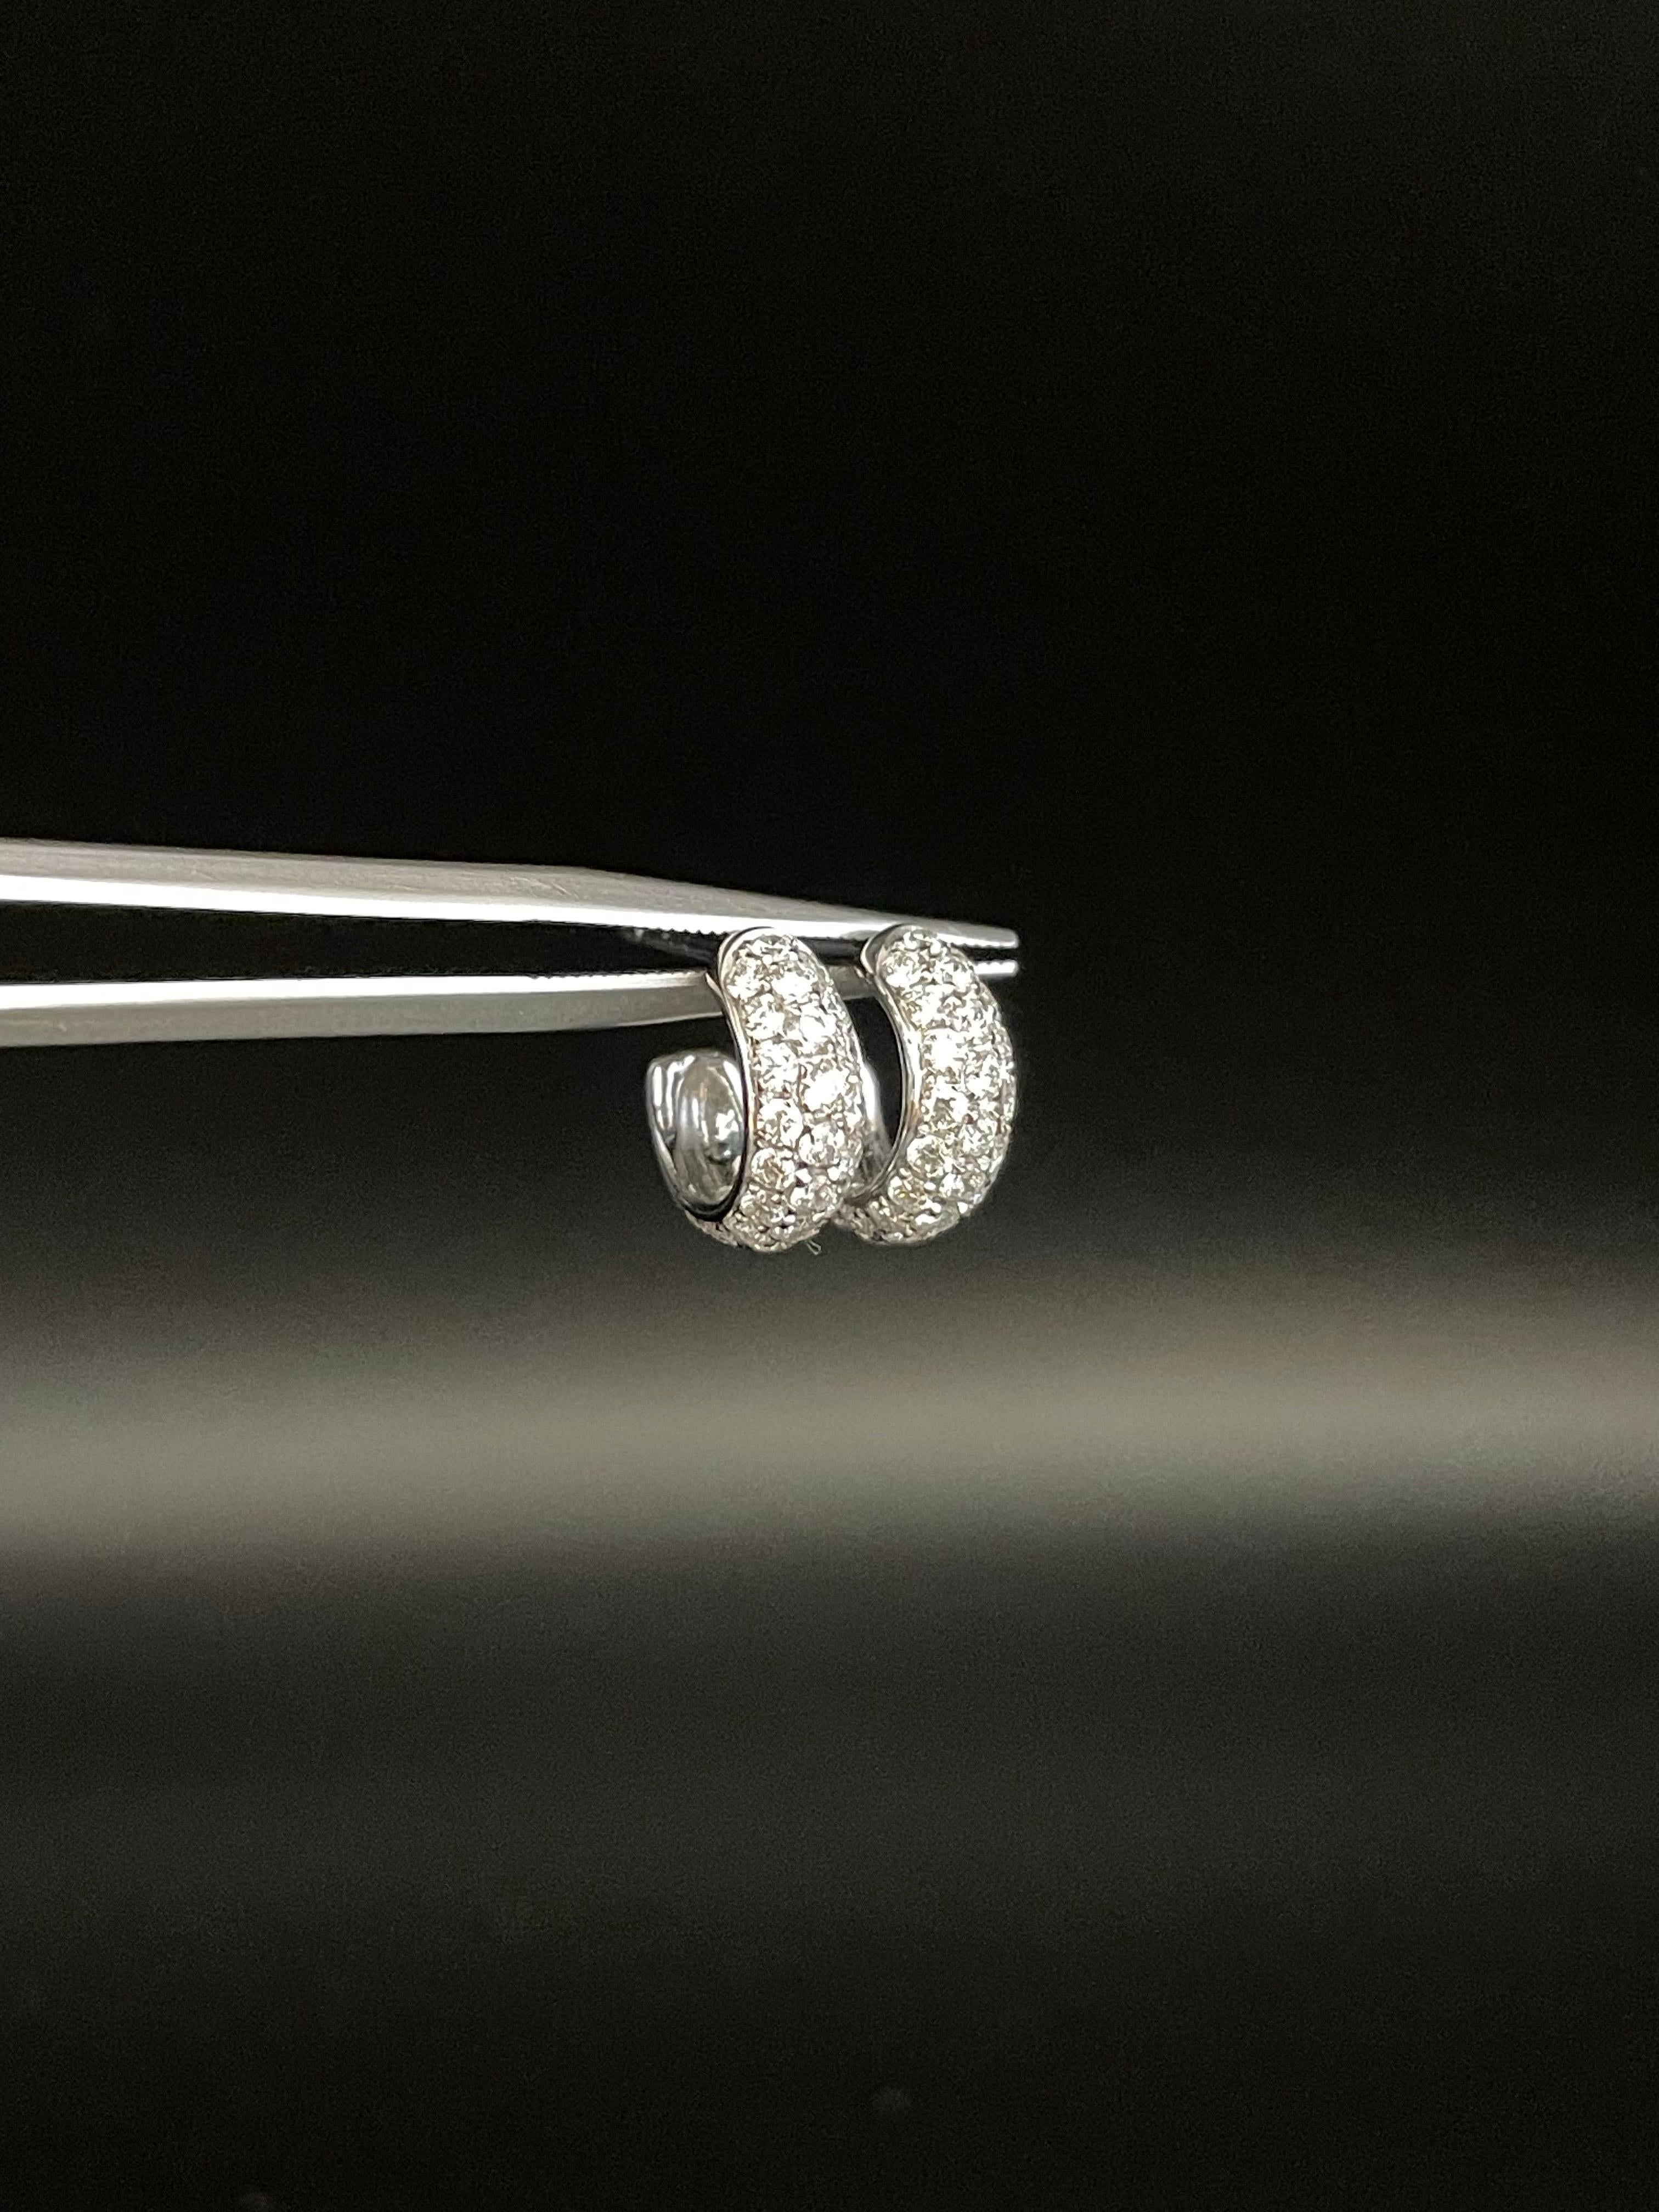 Perfect for a look of sheer elegance, these tiny hoop earrings feature three petite rows of illuminating diamonds framed in striking 18k white gold.  

Product Specifications:
- 36 Round Brilliant Cut Diamonds with 0.52ct
- 20 Round Brilliant Cut